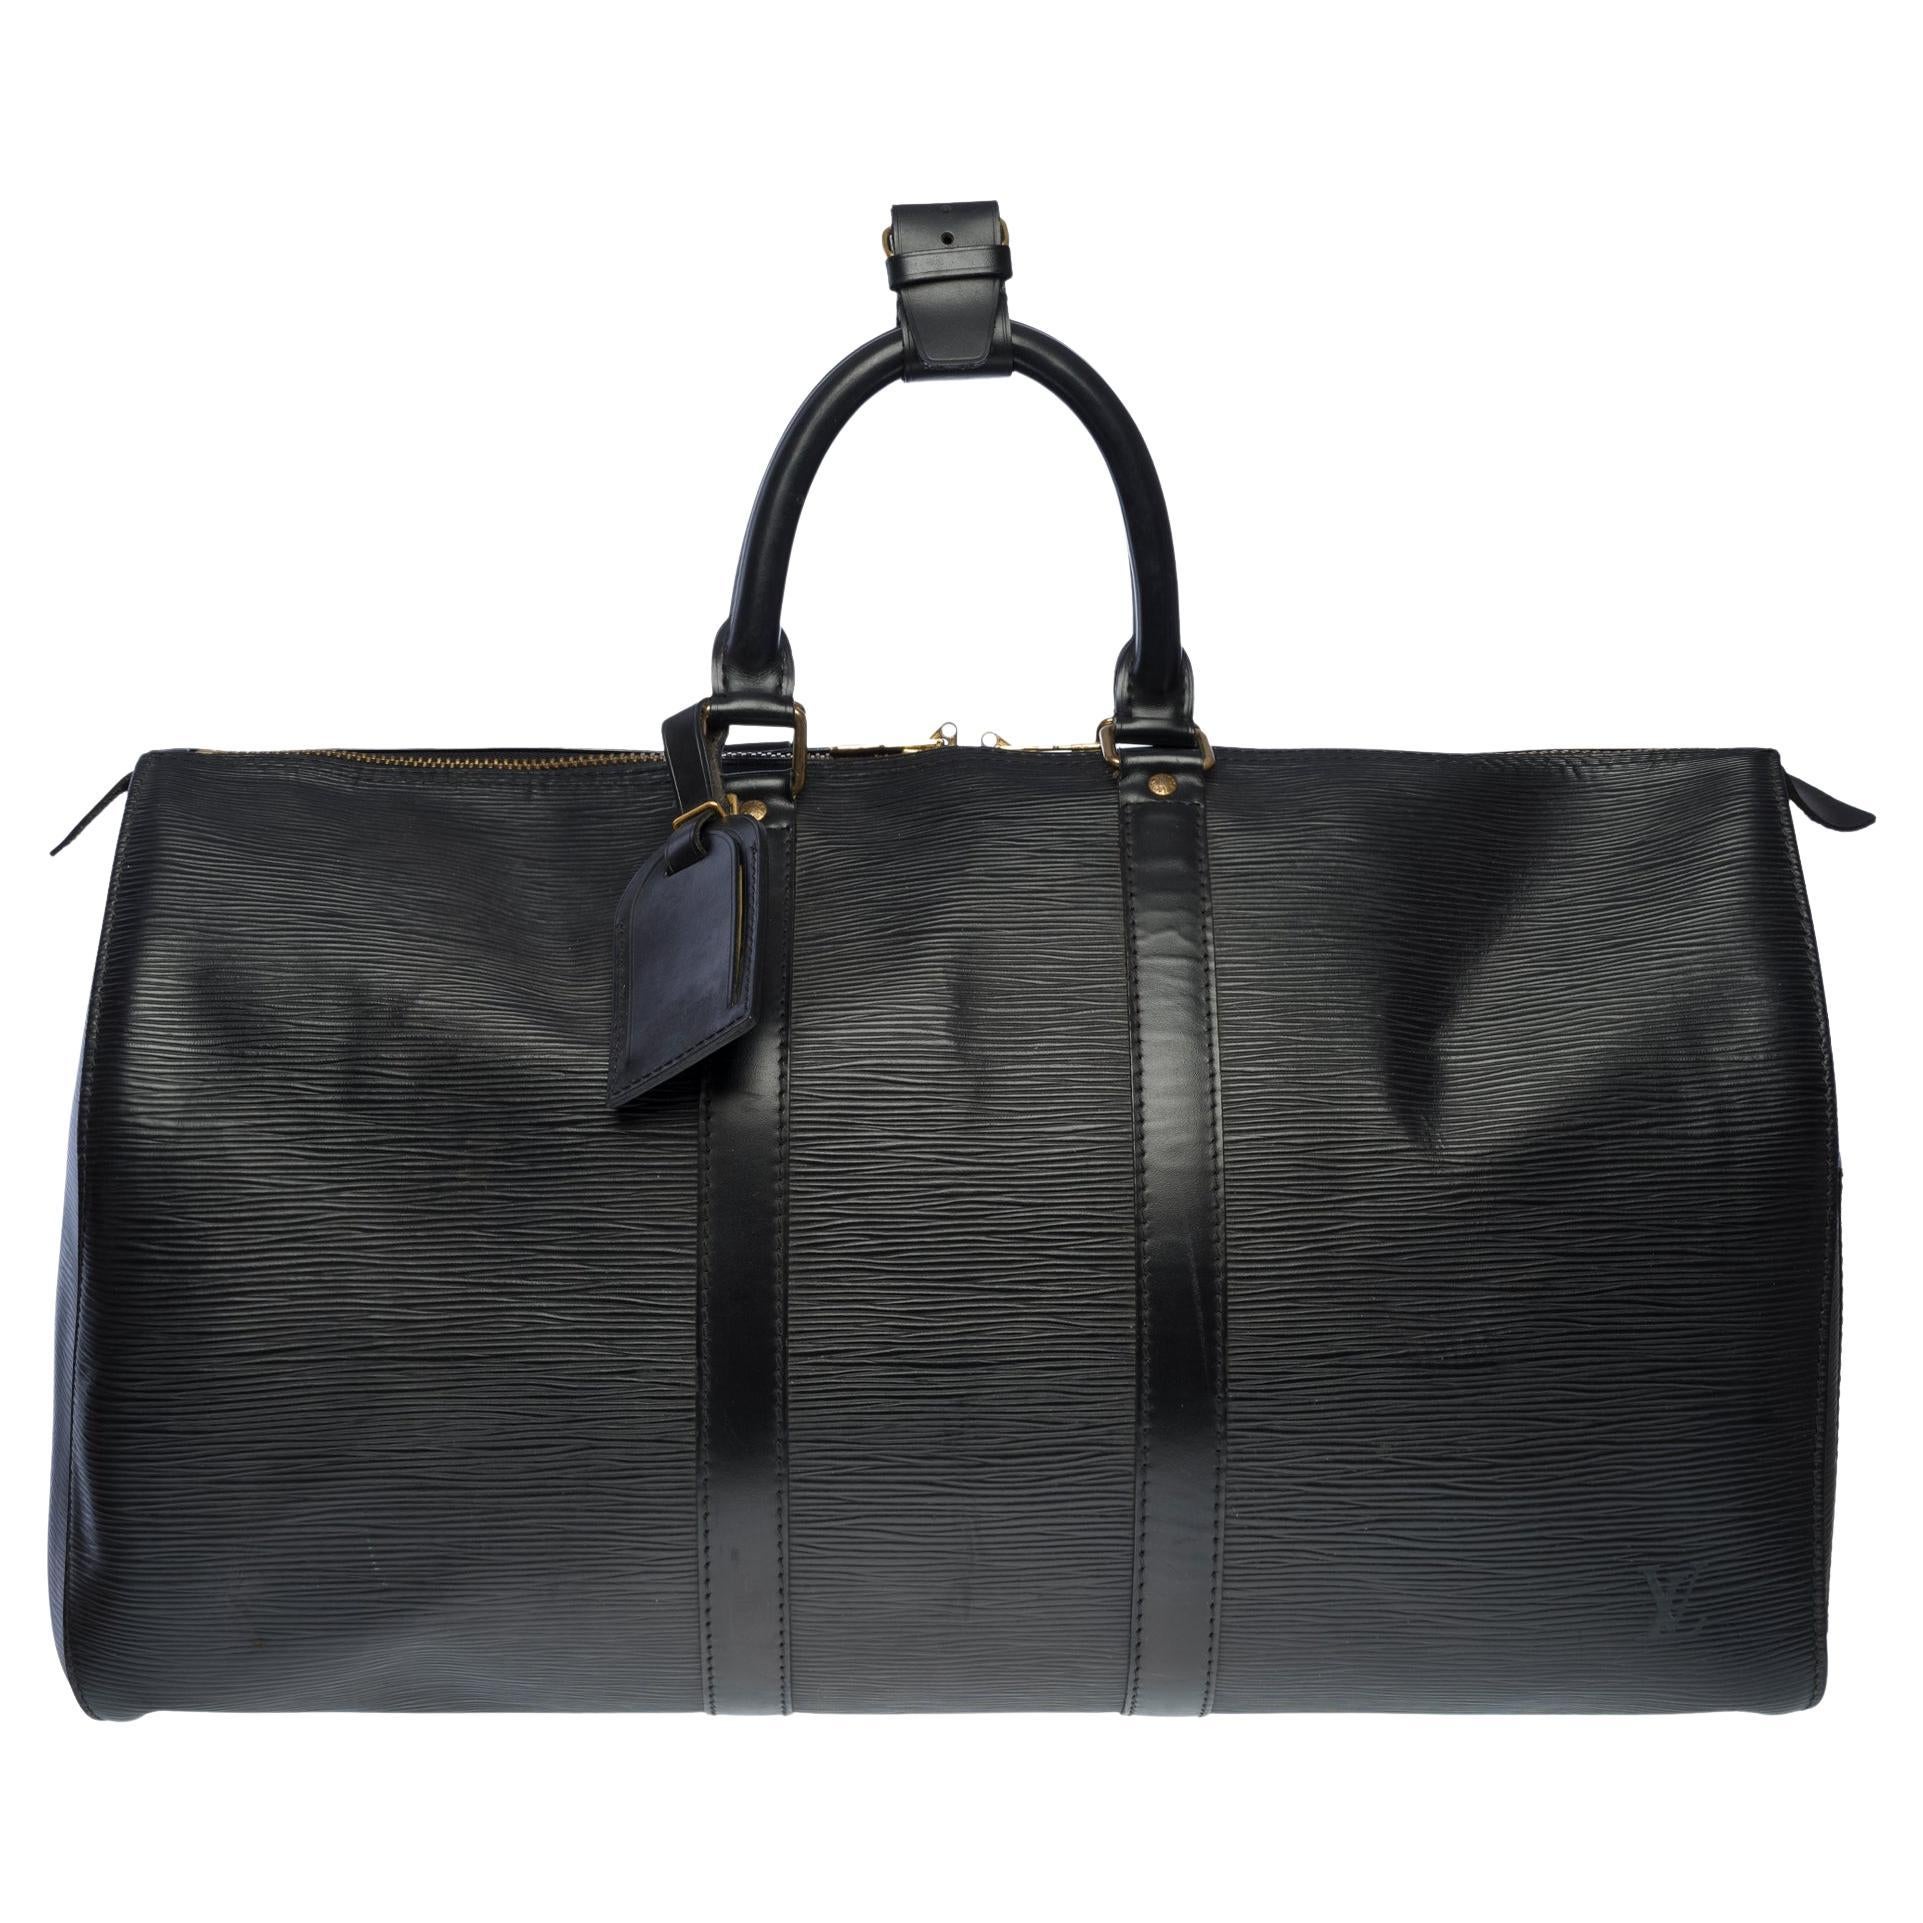 The very Chic Louis Vuitton Keepall 45 Travel bag in black epi leather, GHW